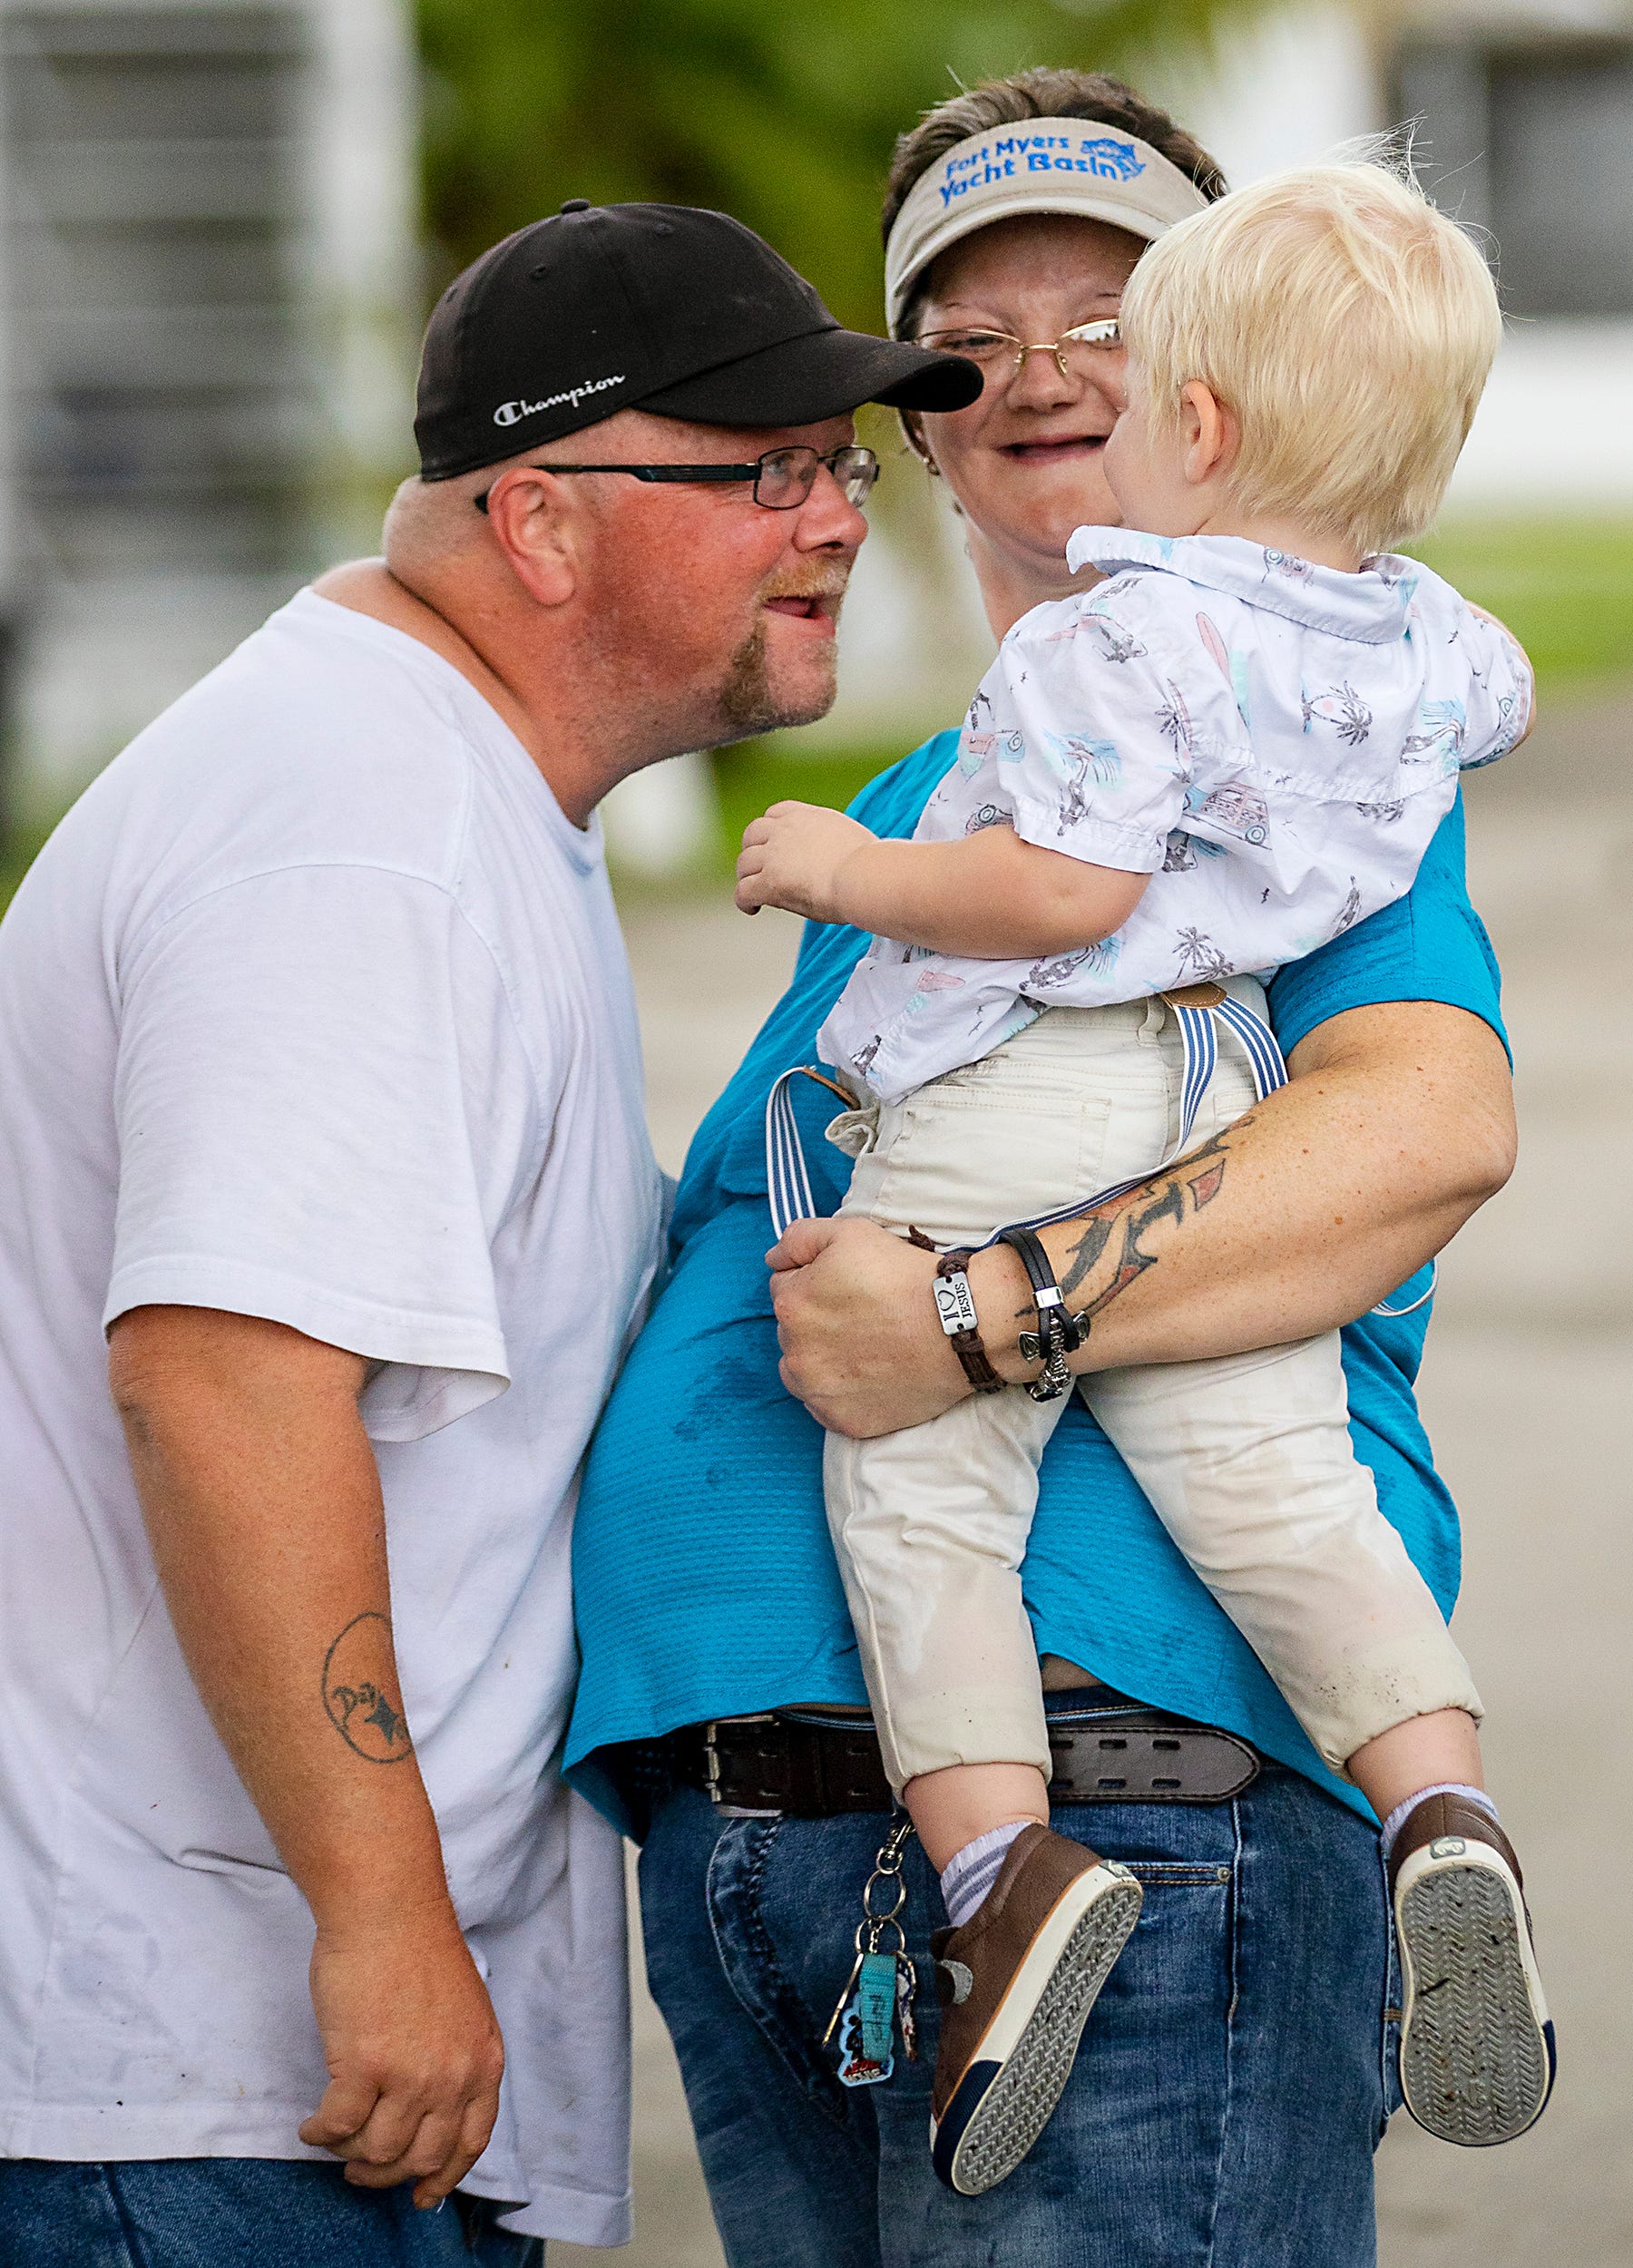 Kyrstal Hartman and her son Jack celebrated being reunited in their new home in July with Jack’s father Jason Davis.